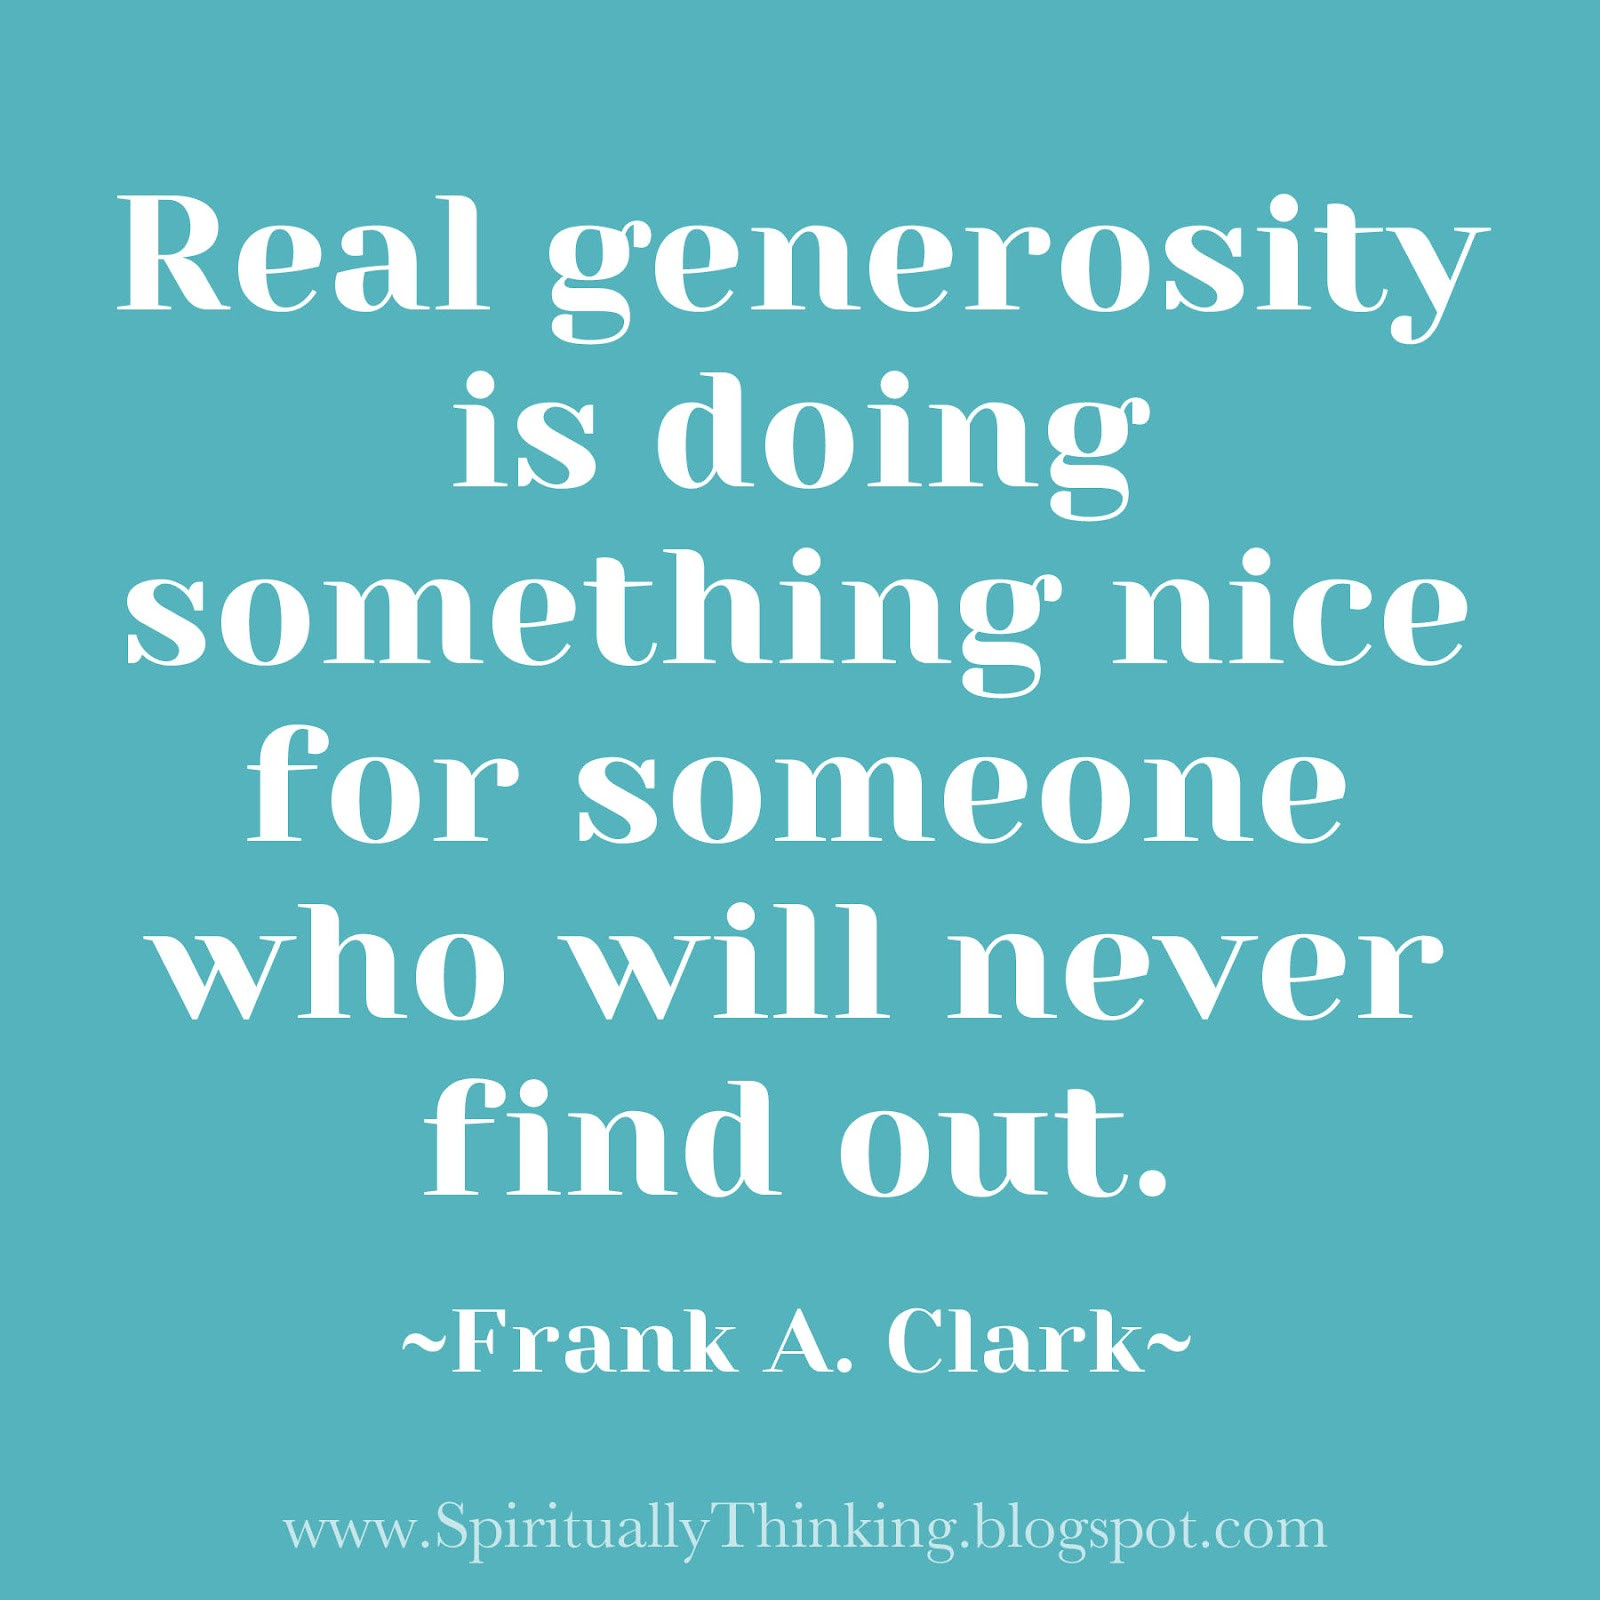 Quotes On Kindness And Generosity
 Random Acts Kindness Biblical Quotes QuotesGram